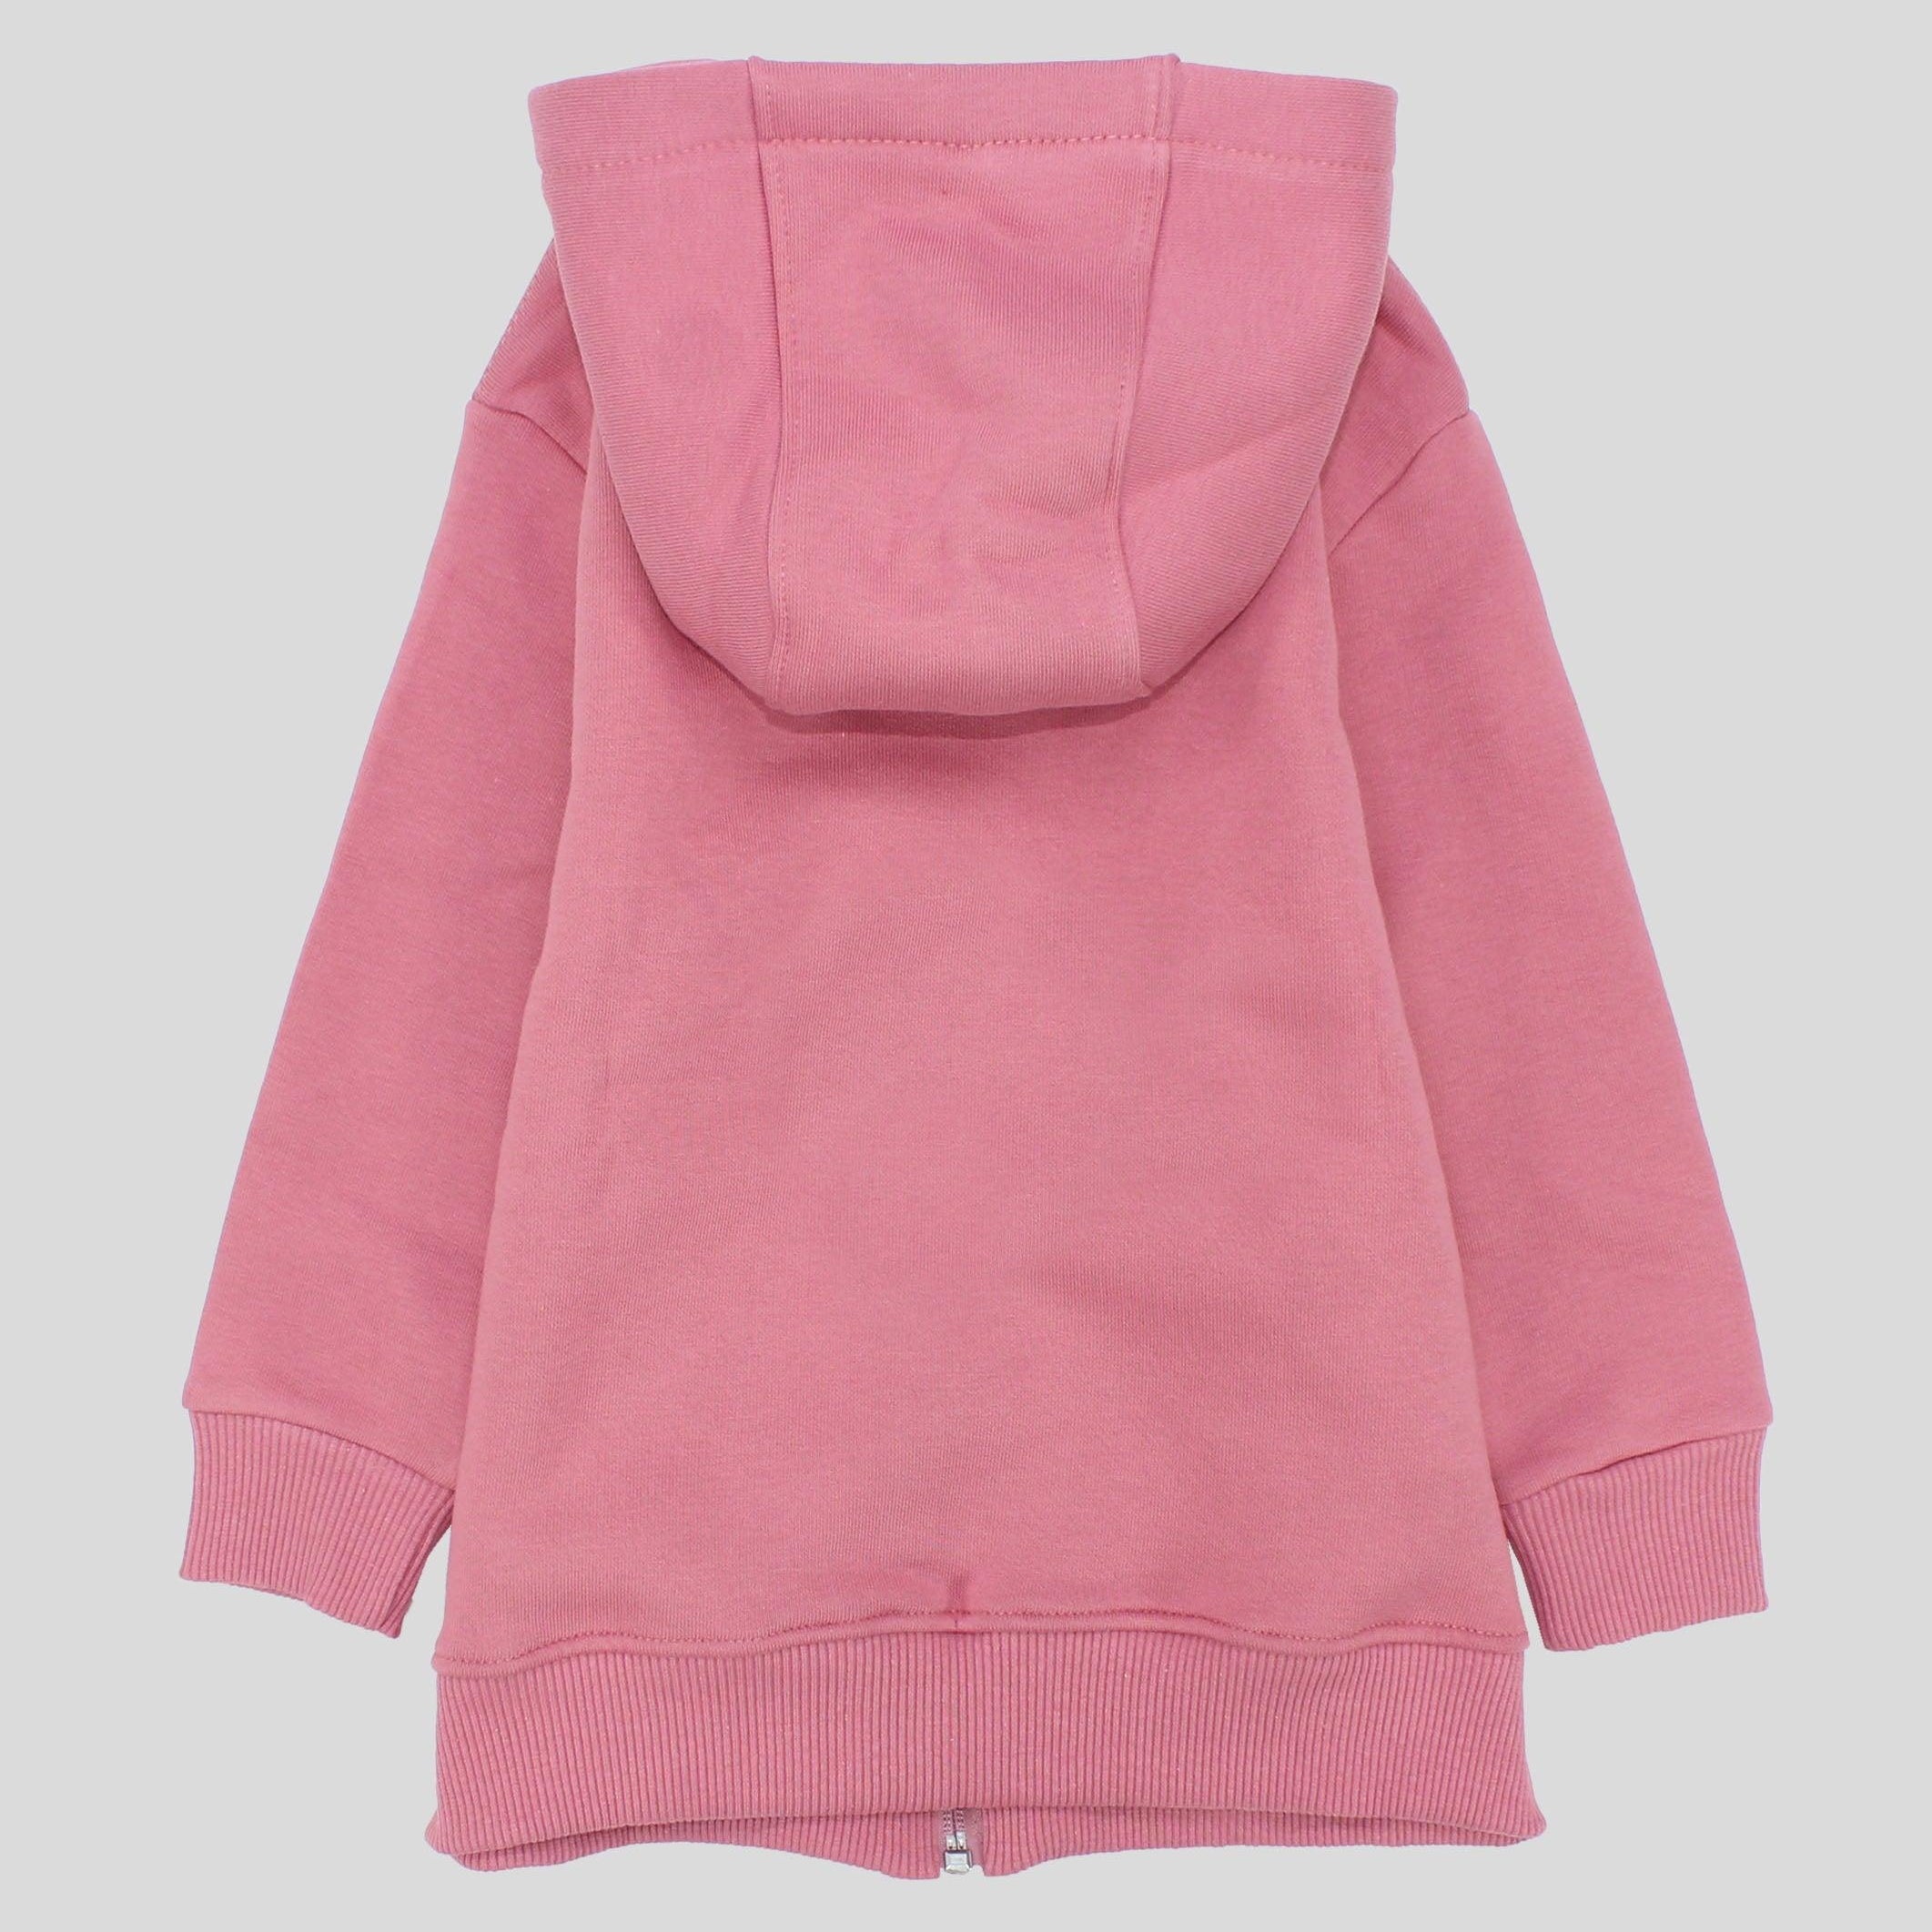 Plain Long-Sleeved Zip-Up Hoodie - Ourkids - Ourkids